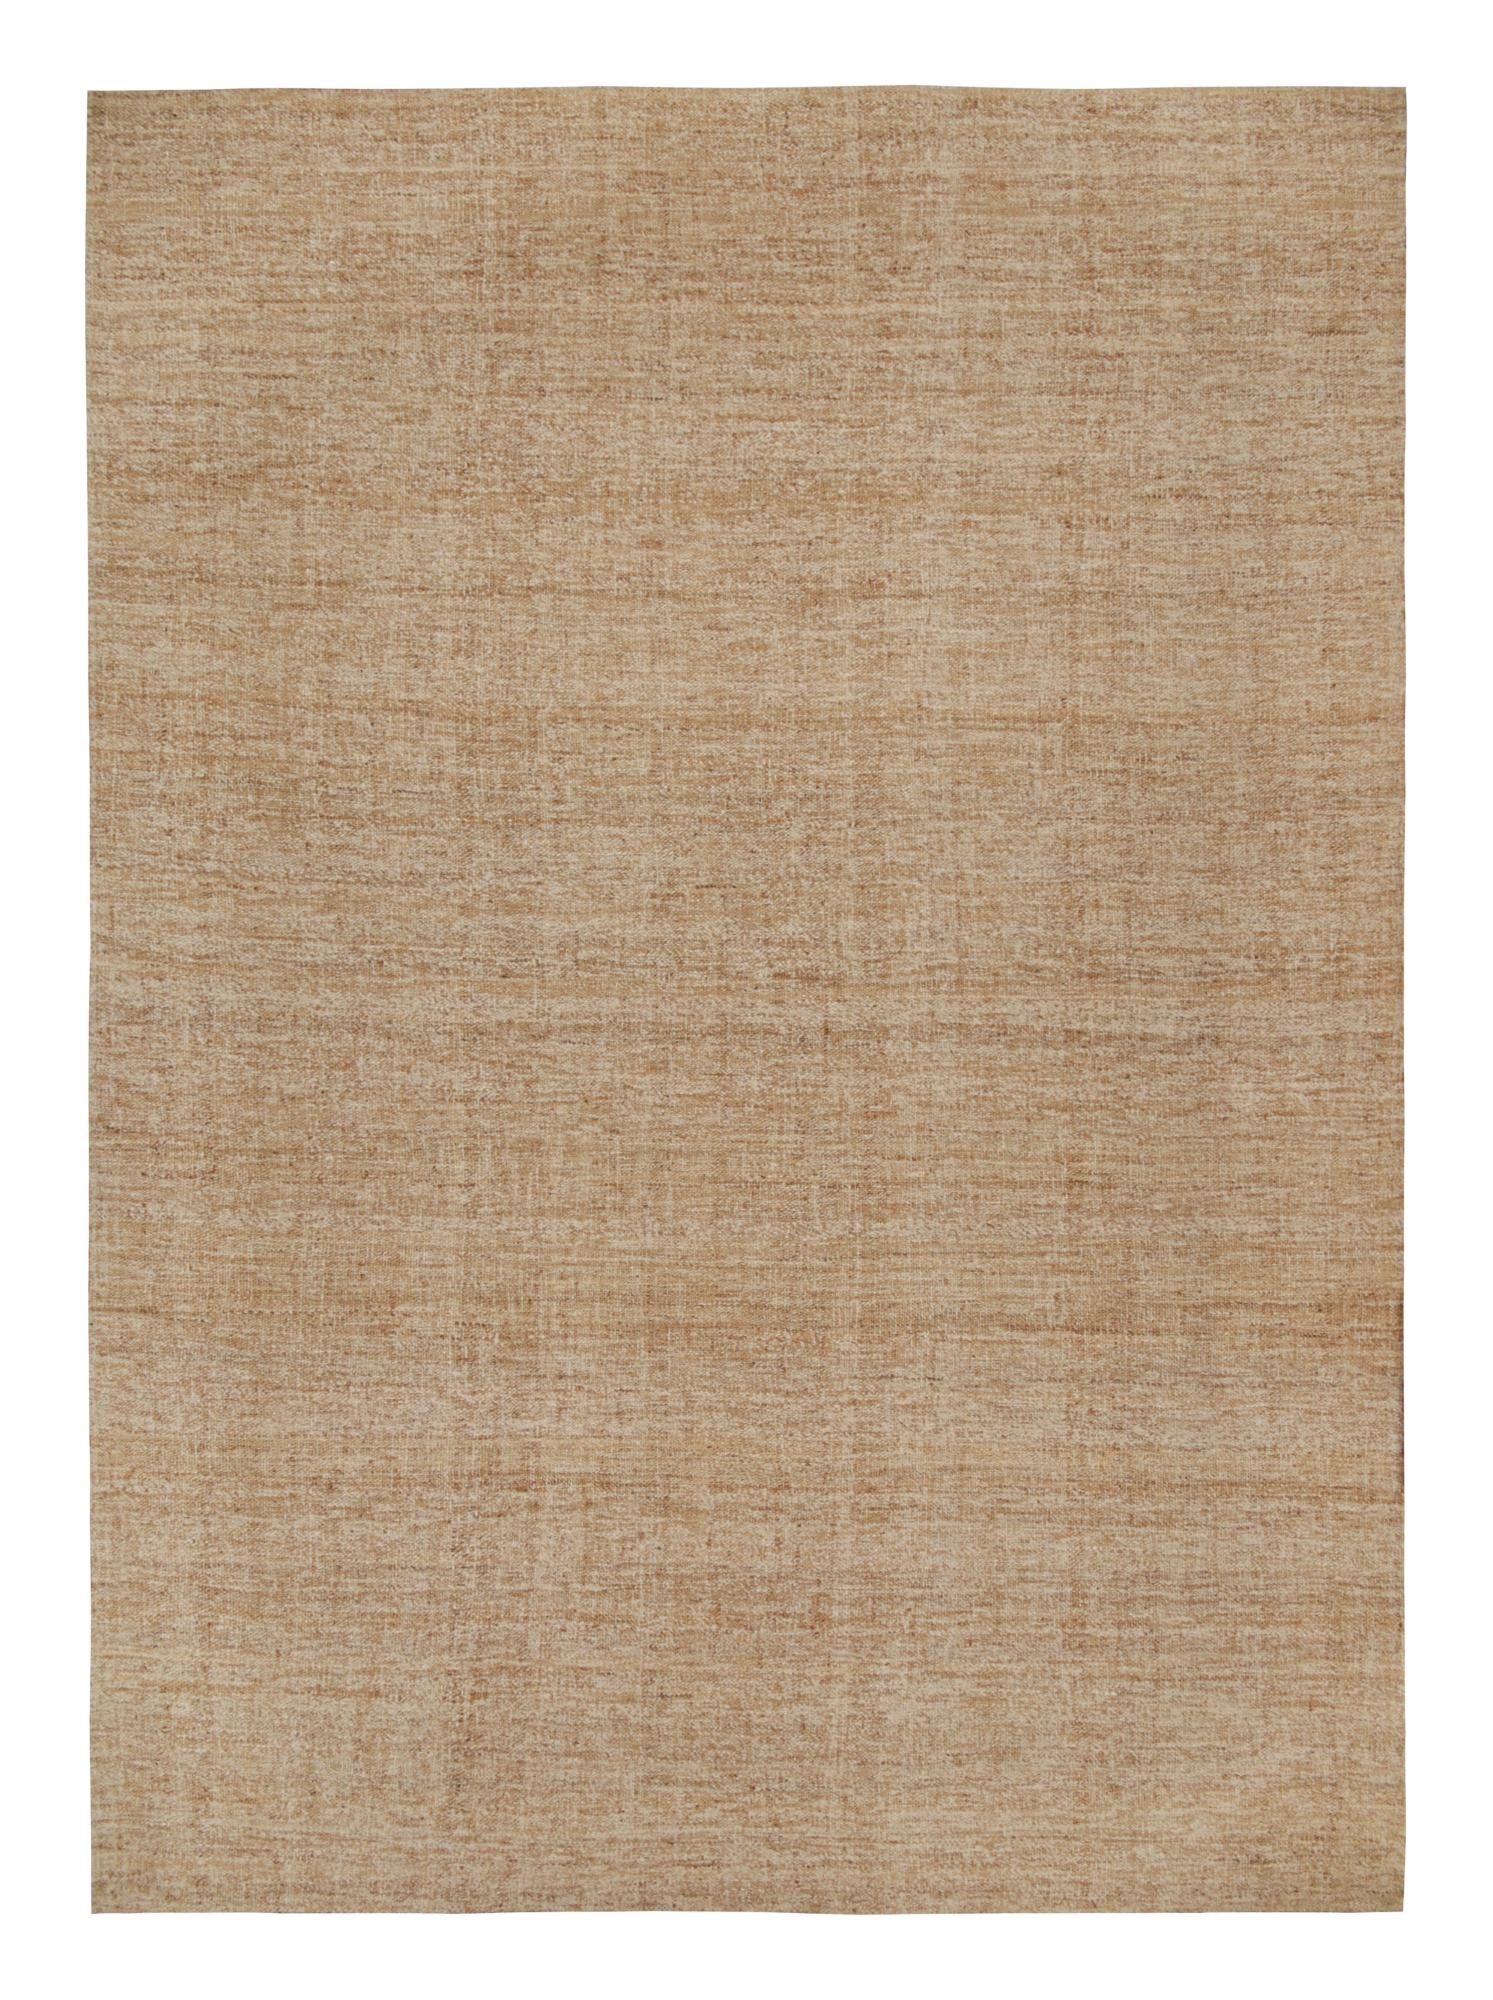 Hand-Knotted Rug & Kilim’s Contemporary Jute kilim in Beige-Brown For Sale